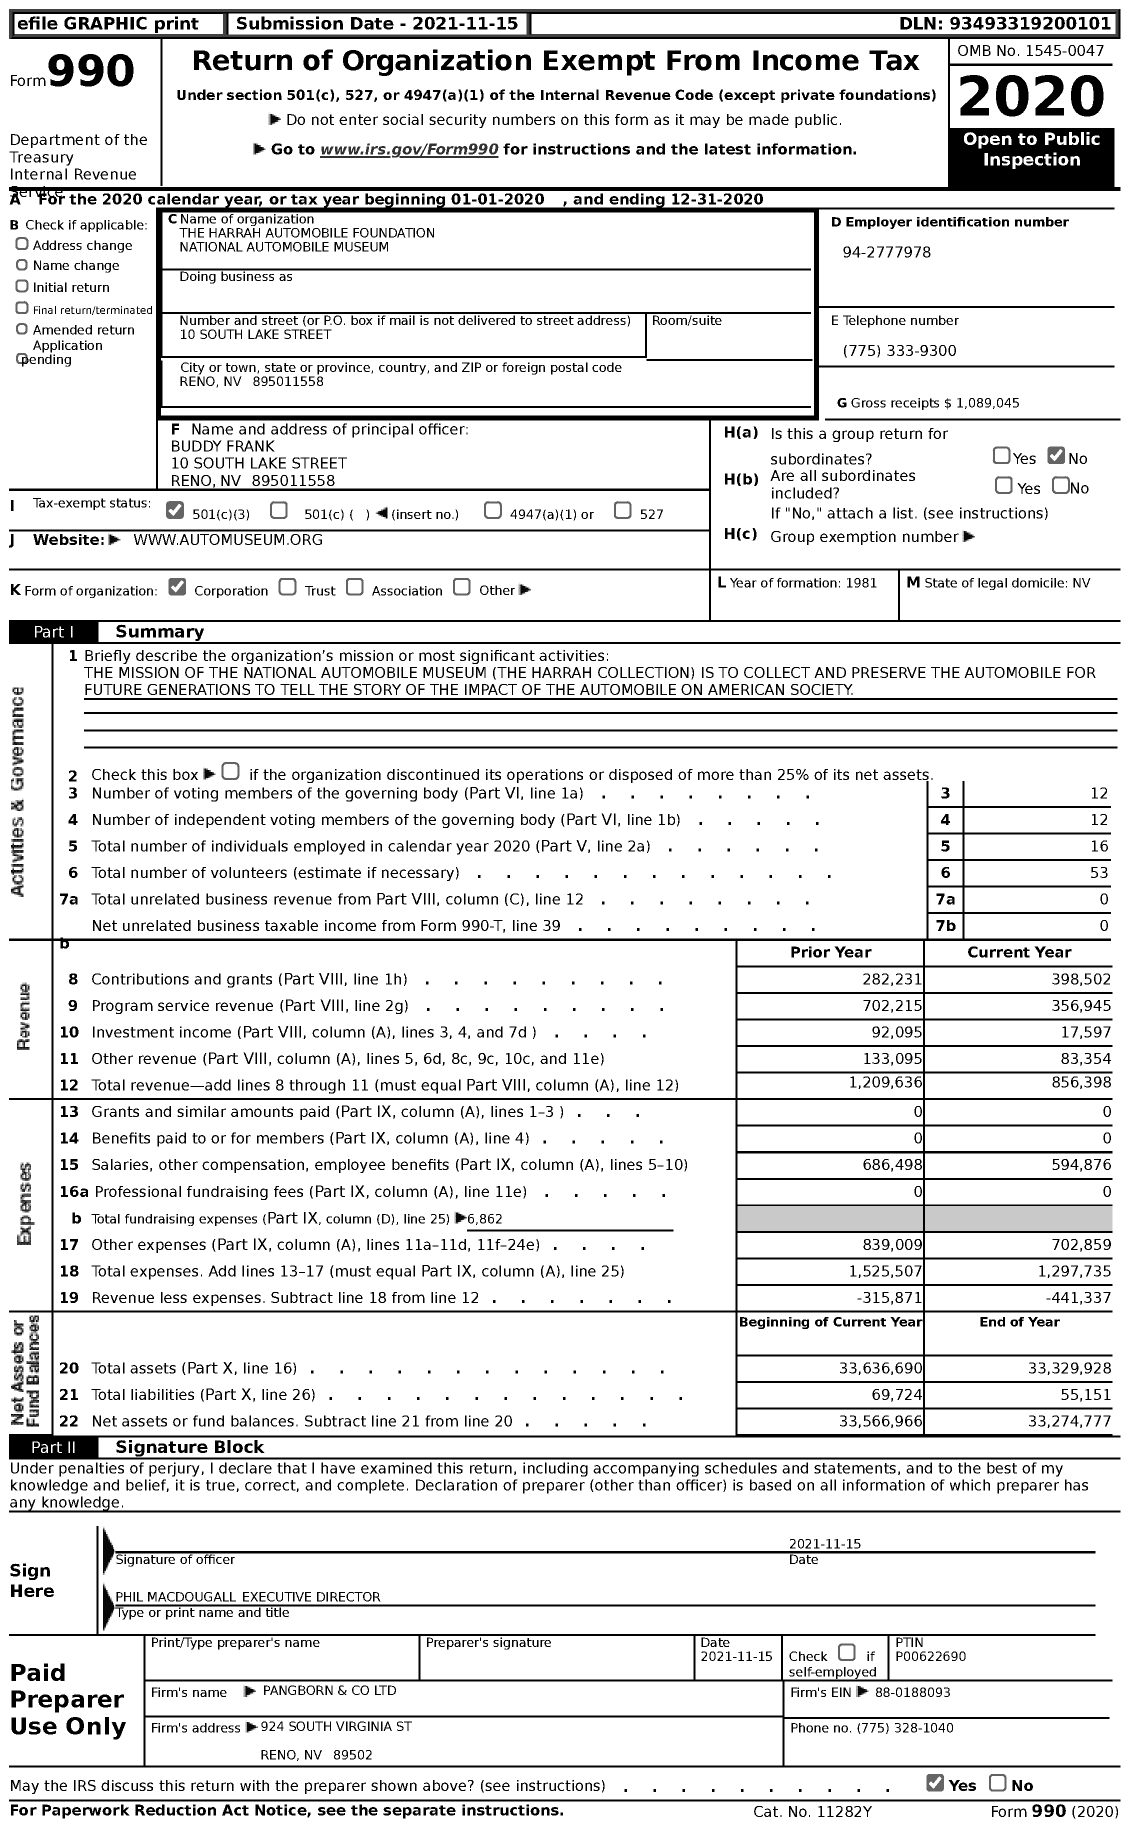 Image of first page of 2020 Form 990 for The Harrah Automobile Foundation National Automobile Museum